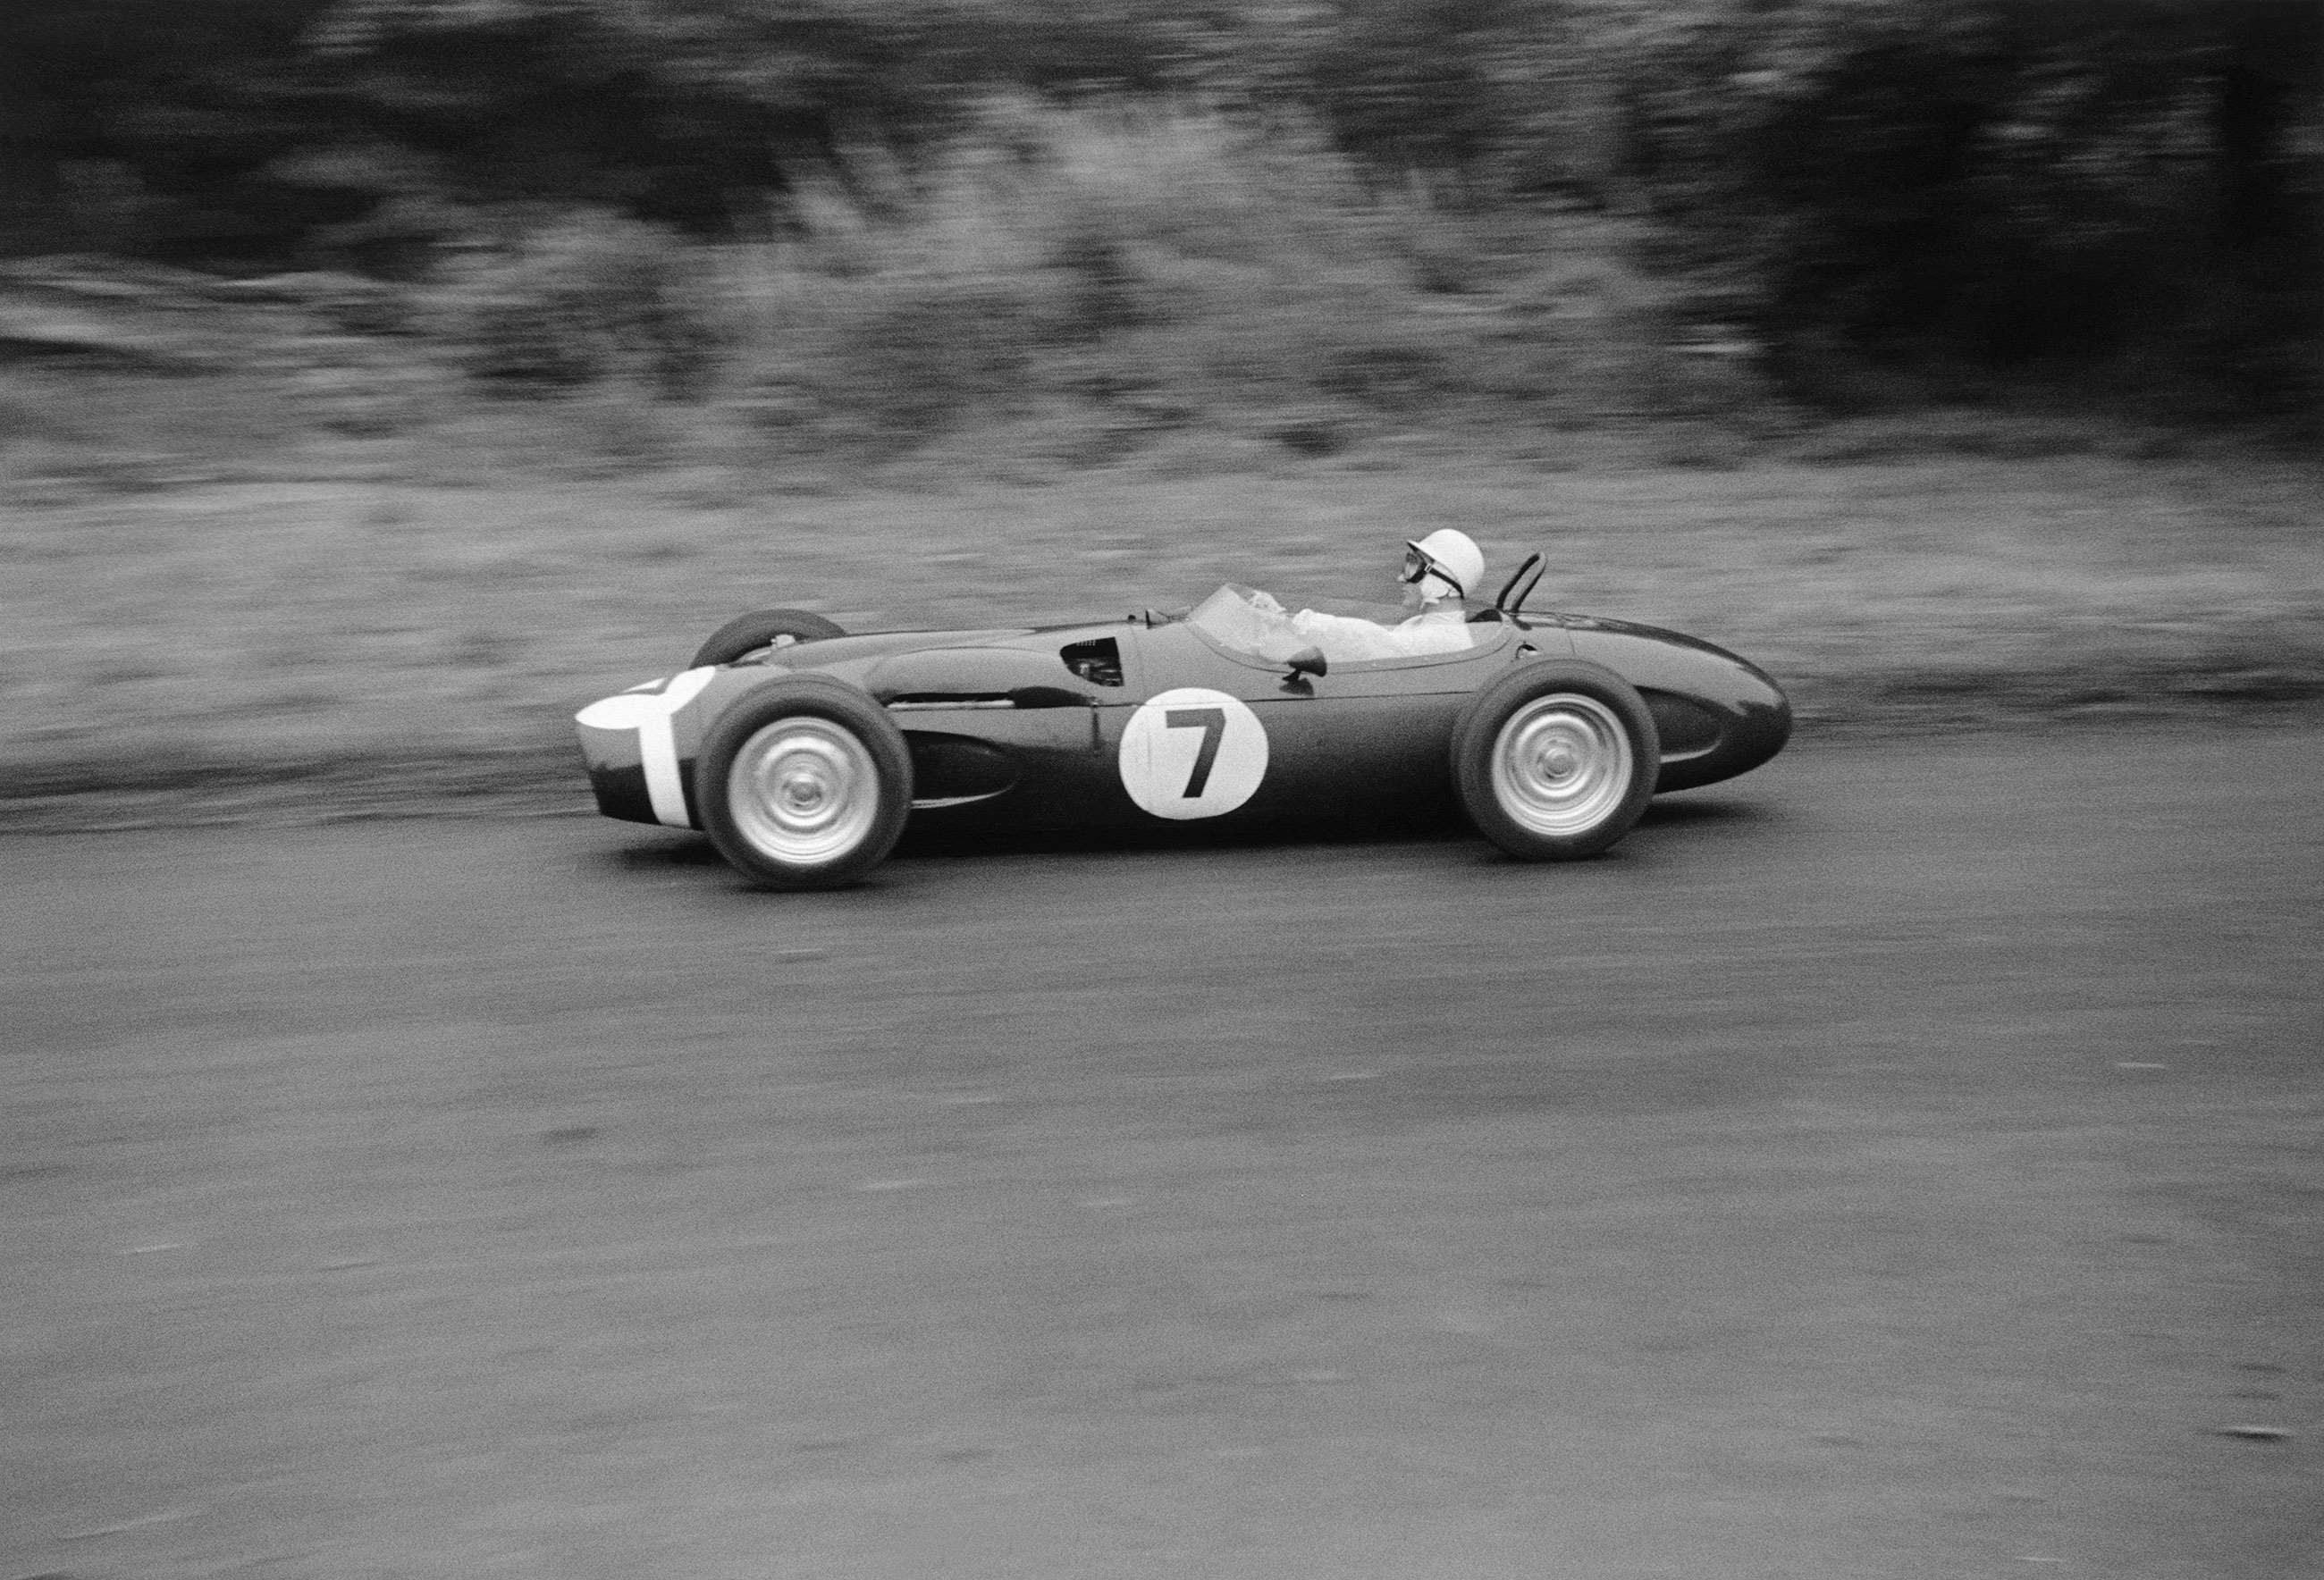 Stirling Moss at Oulton Park, 1961, driving the four-wheel-drive Ferguson P99-Climax S4 to victory.